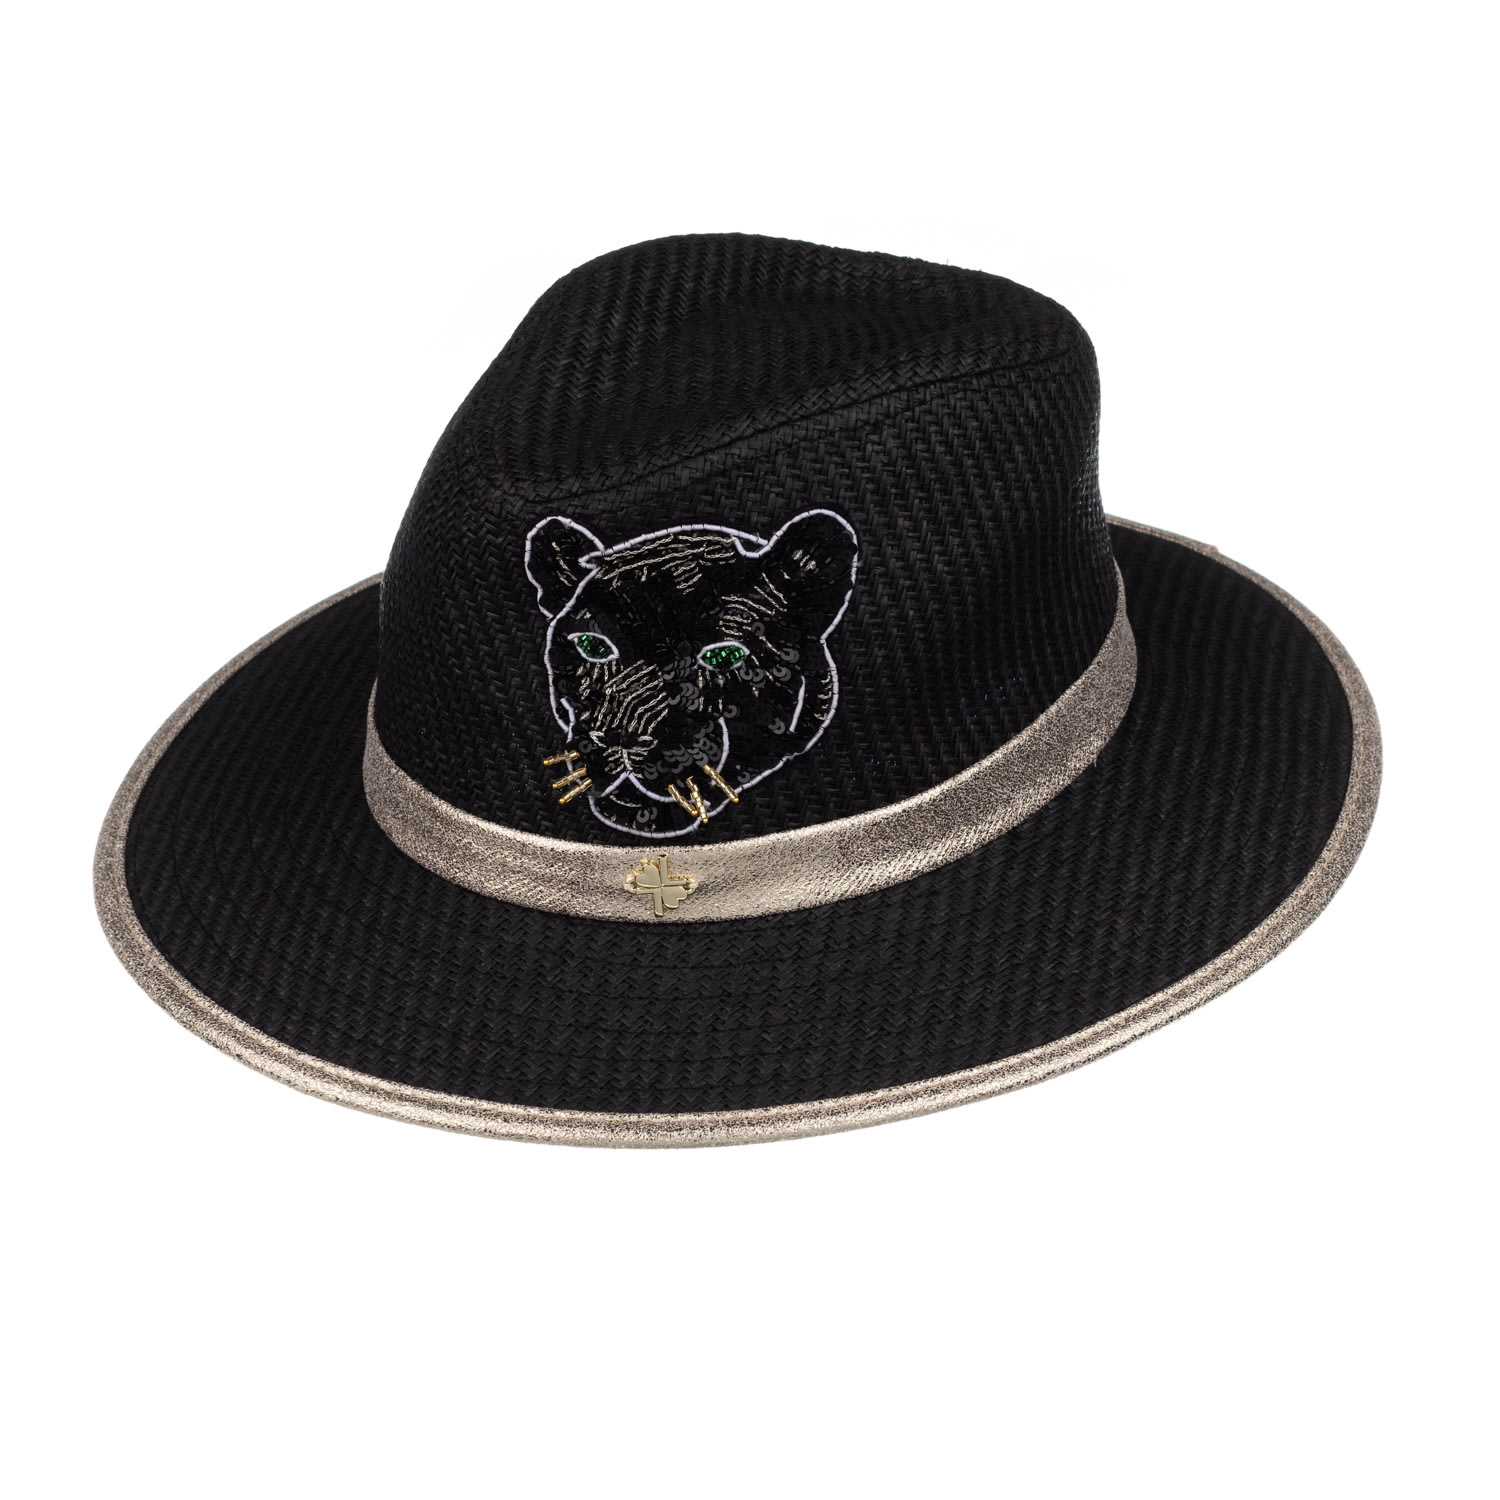 Women’s Straw Woven Hat With Couture Embellished Black Panther Design - Black One Size Laines London